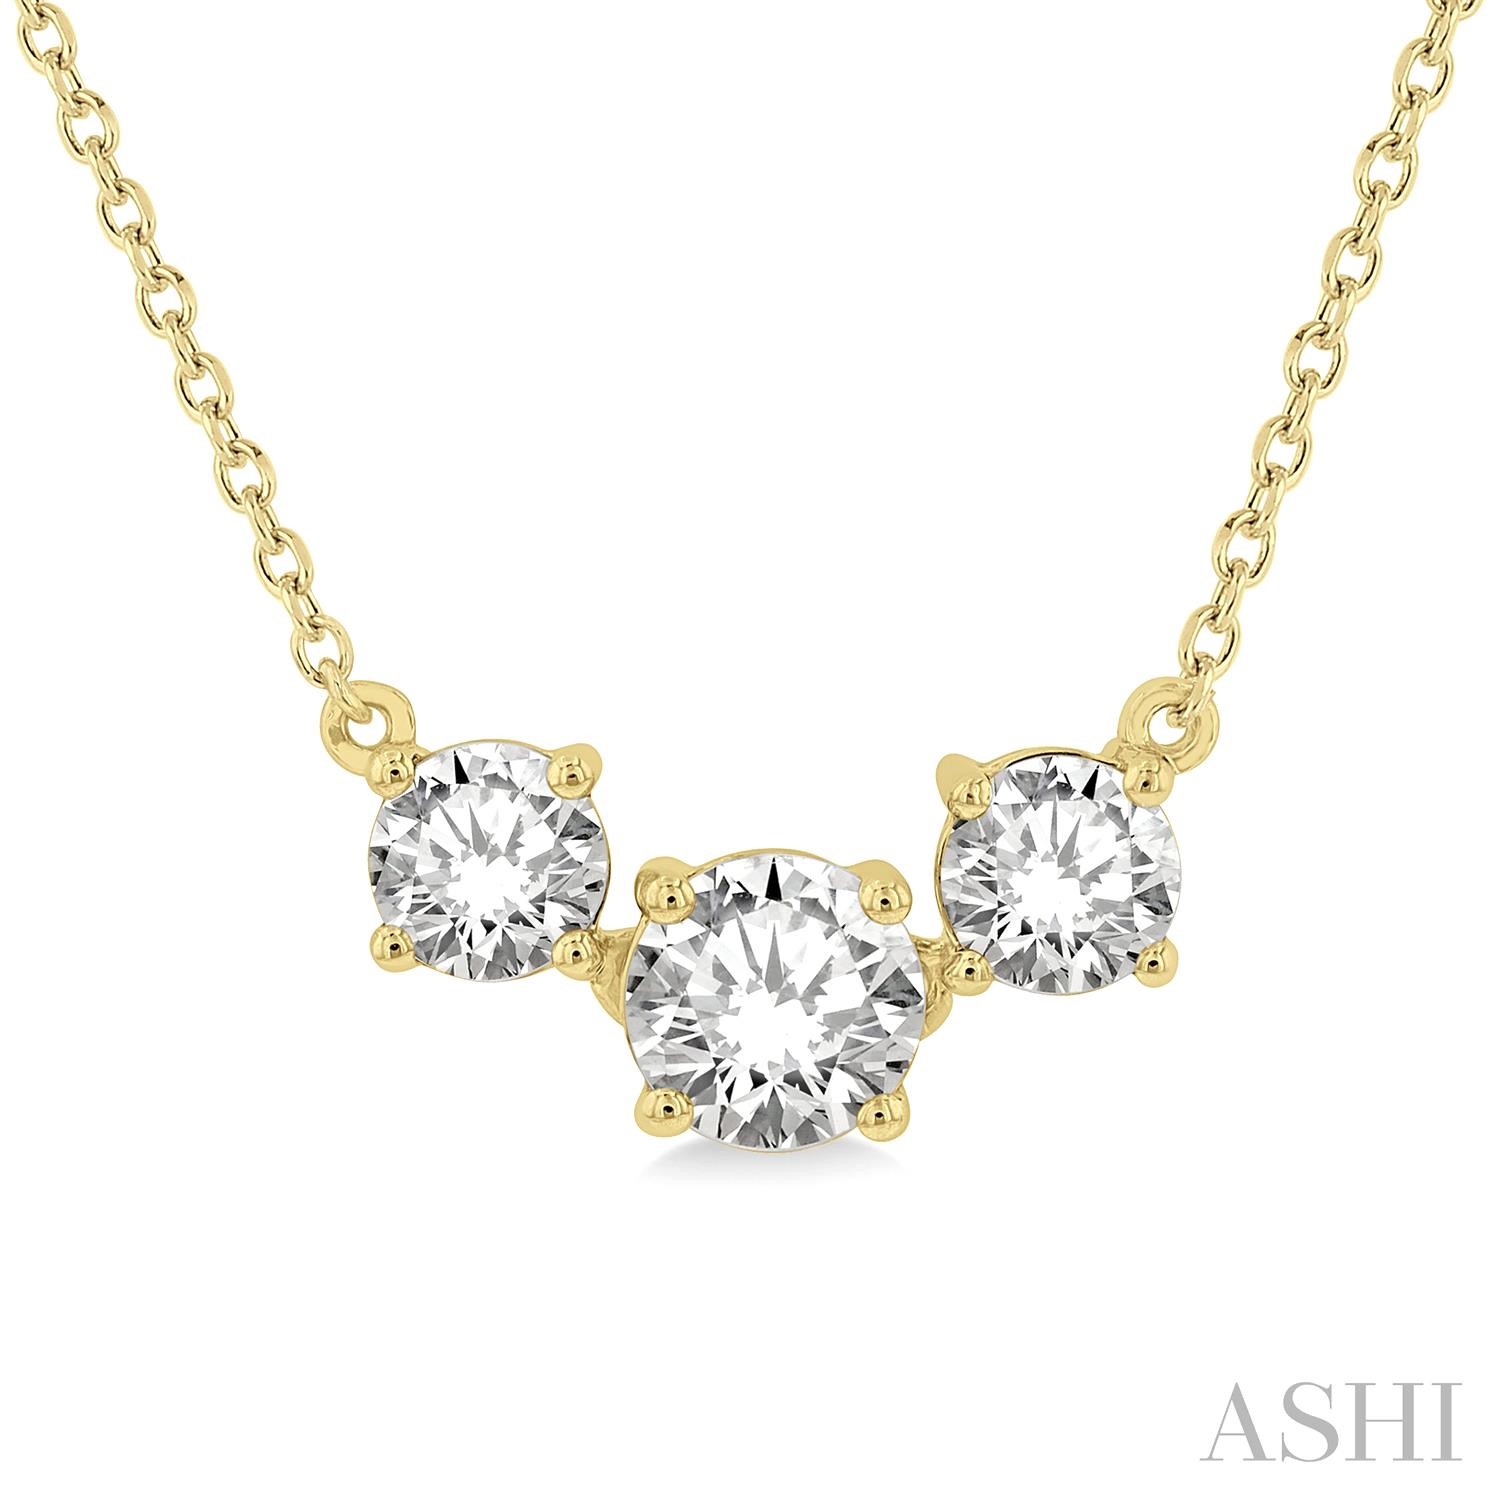 14K YELLOW GOLD 3-STONE DIAMOND NECKLACE WITH ONE 0.50CT ROUND G-H SI1-SI2 DIAMOND AND 2=0.50TW ROUND G-H SI1-SI2 DIAMONDS 18